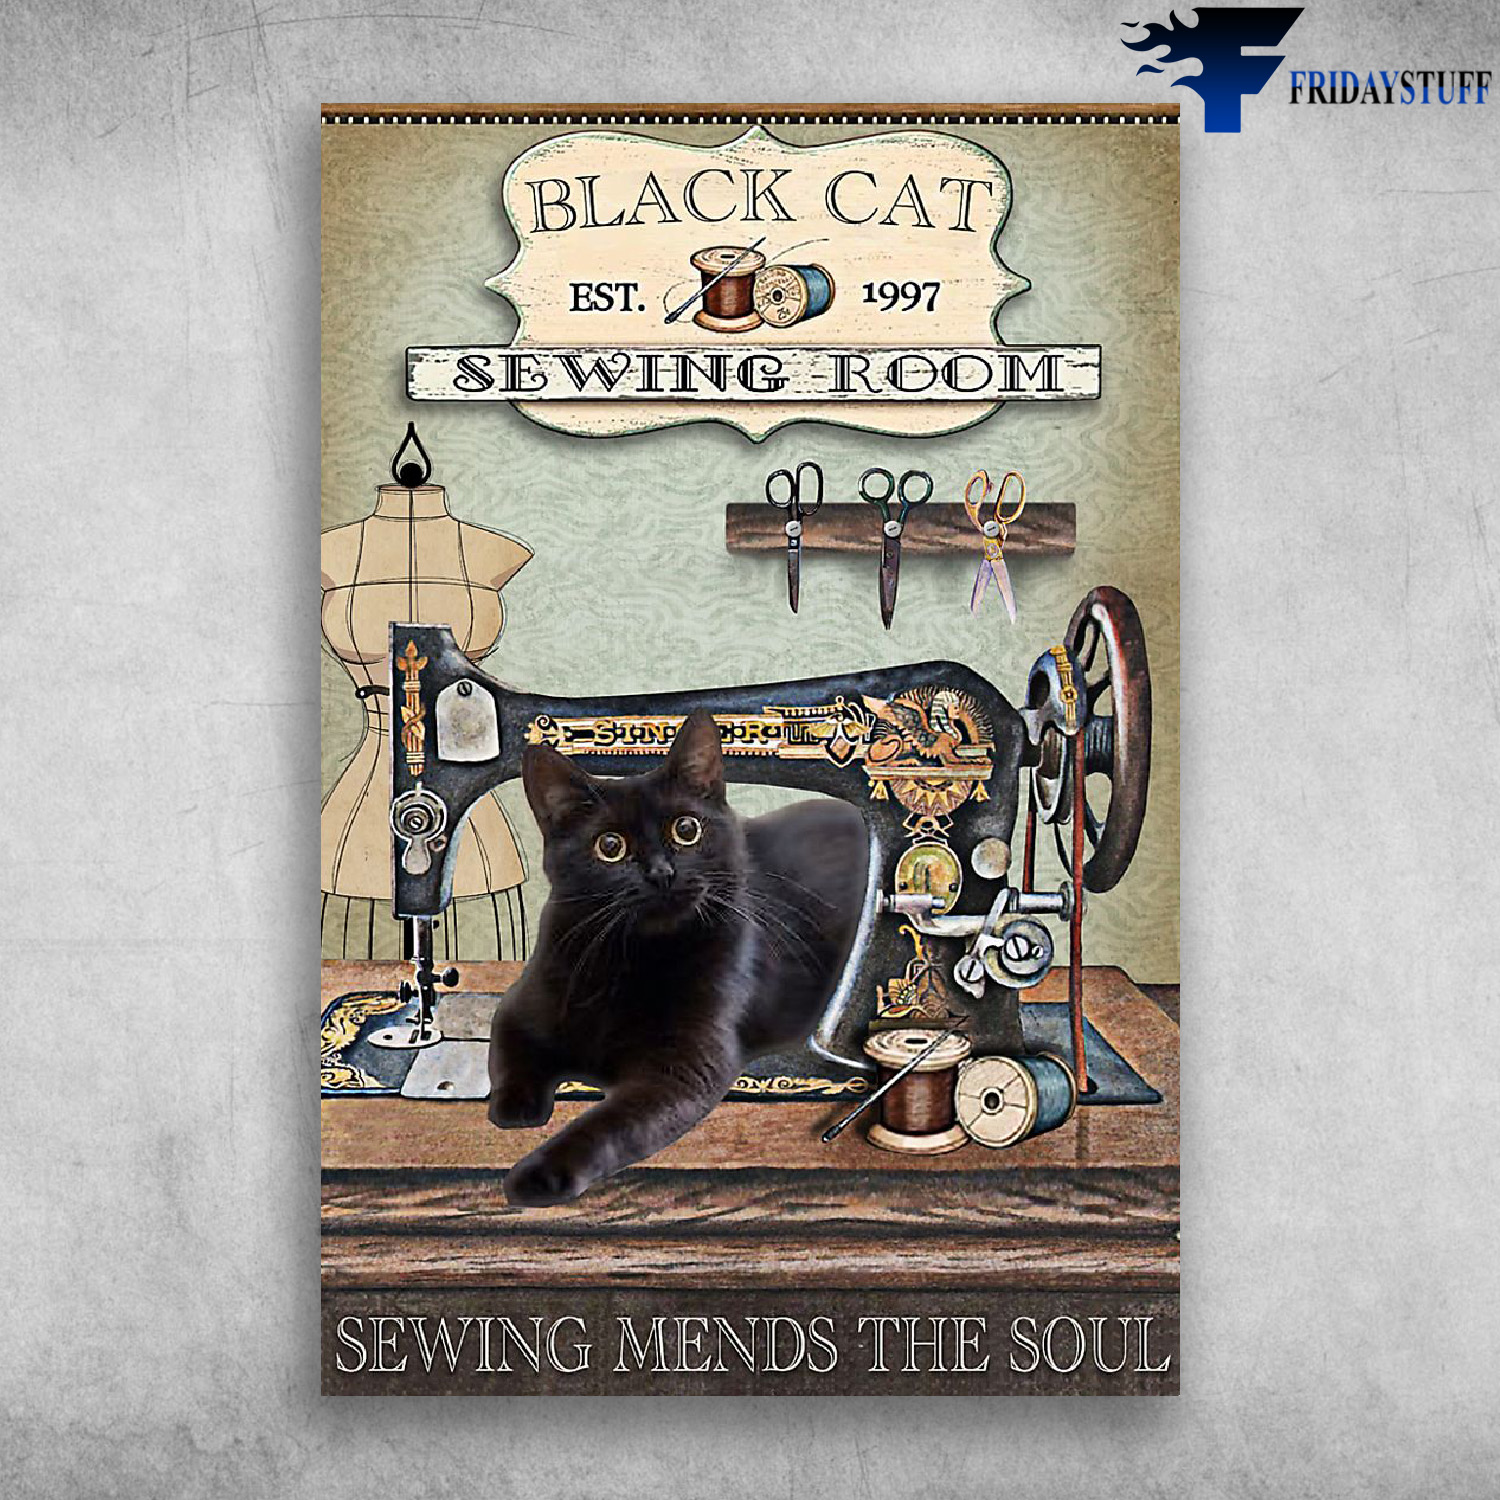 Black Cat Est 1997 Sewing Room Sewing Mends The Soul